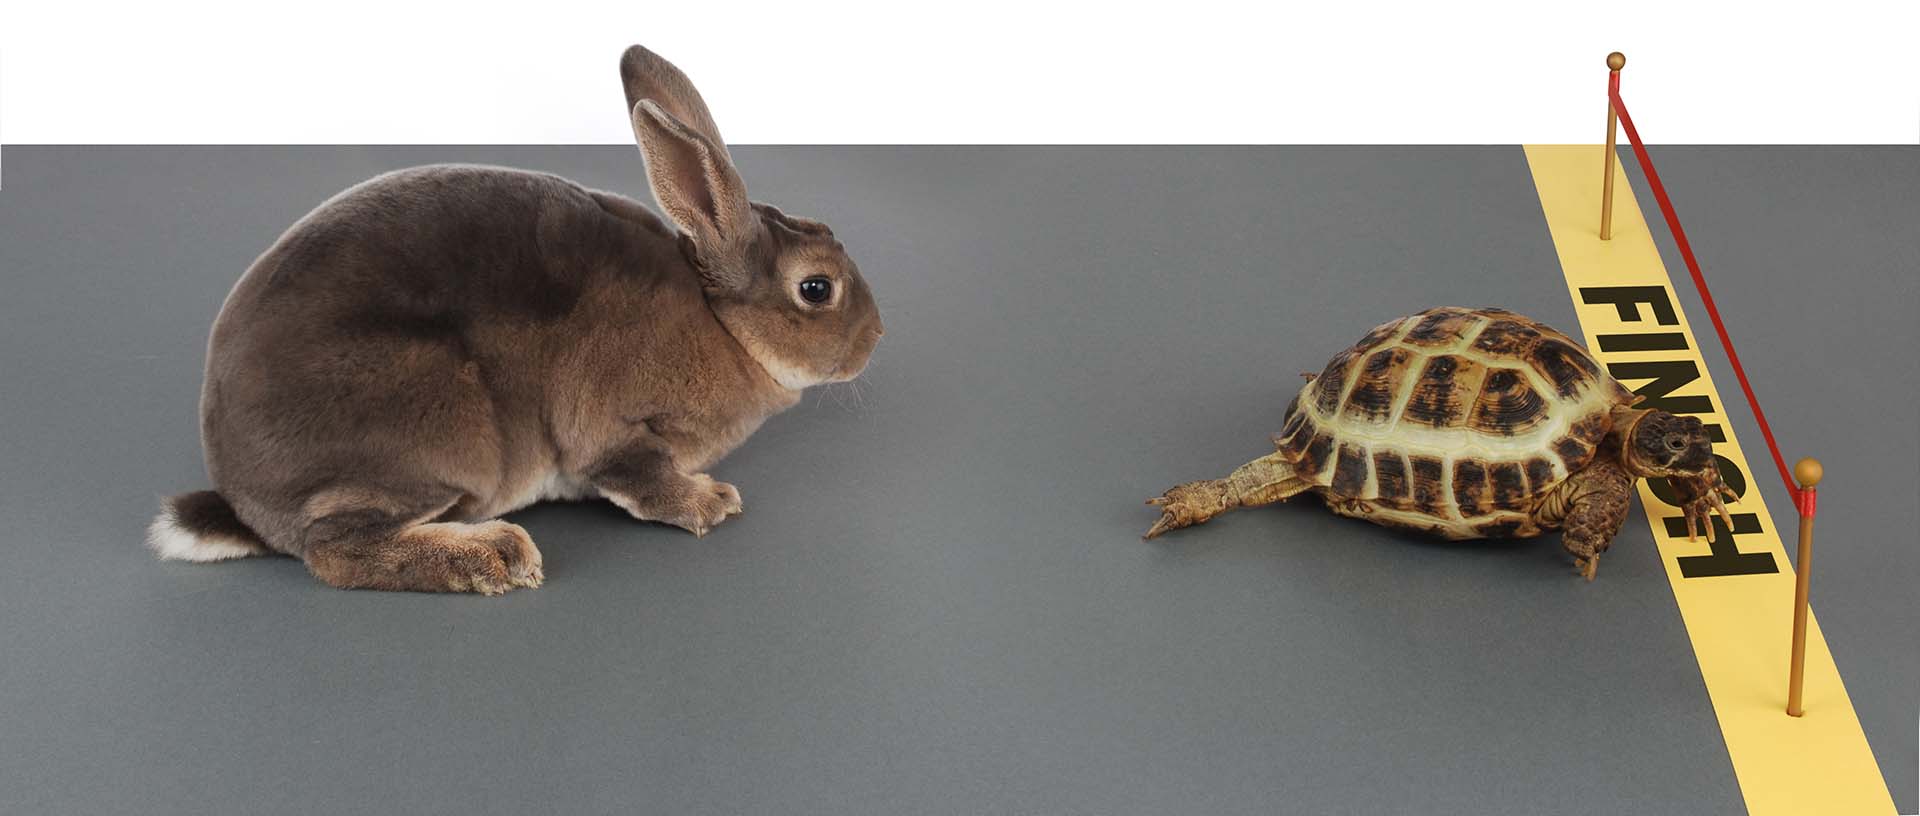 The Benefits of Running a Motor Slower for Longer. The picture depict the tortoise and hare with the tortoise winning the race